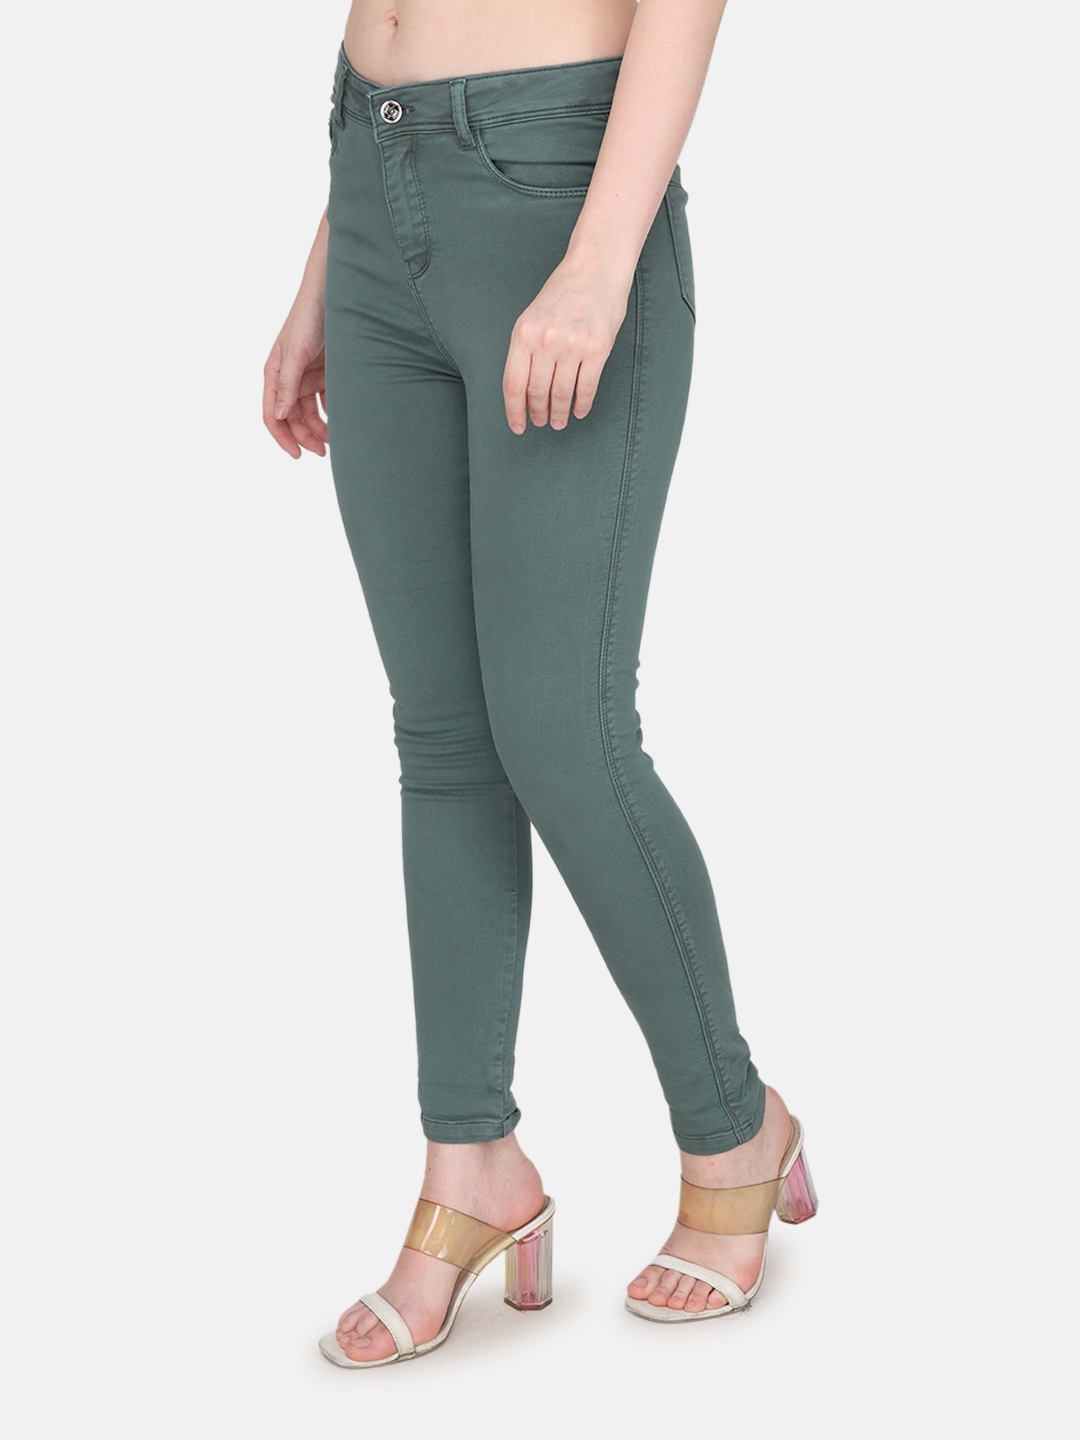 Albion | Albion By CnM Women Green Denim Stretchable Jeans 1